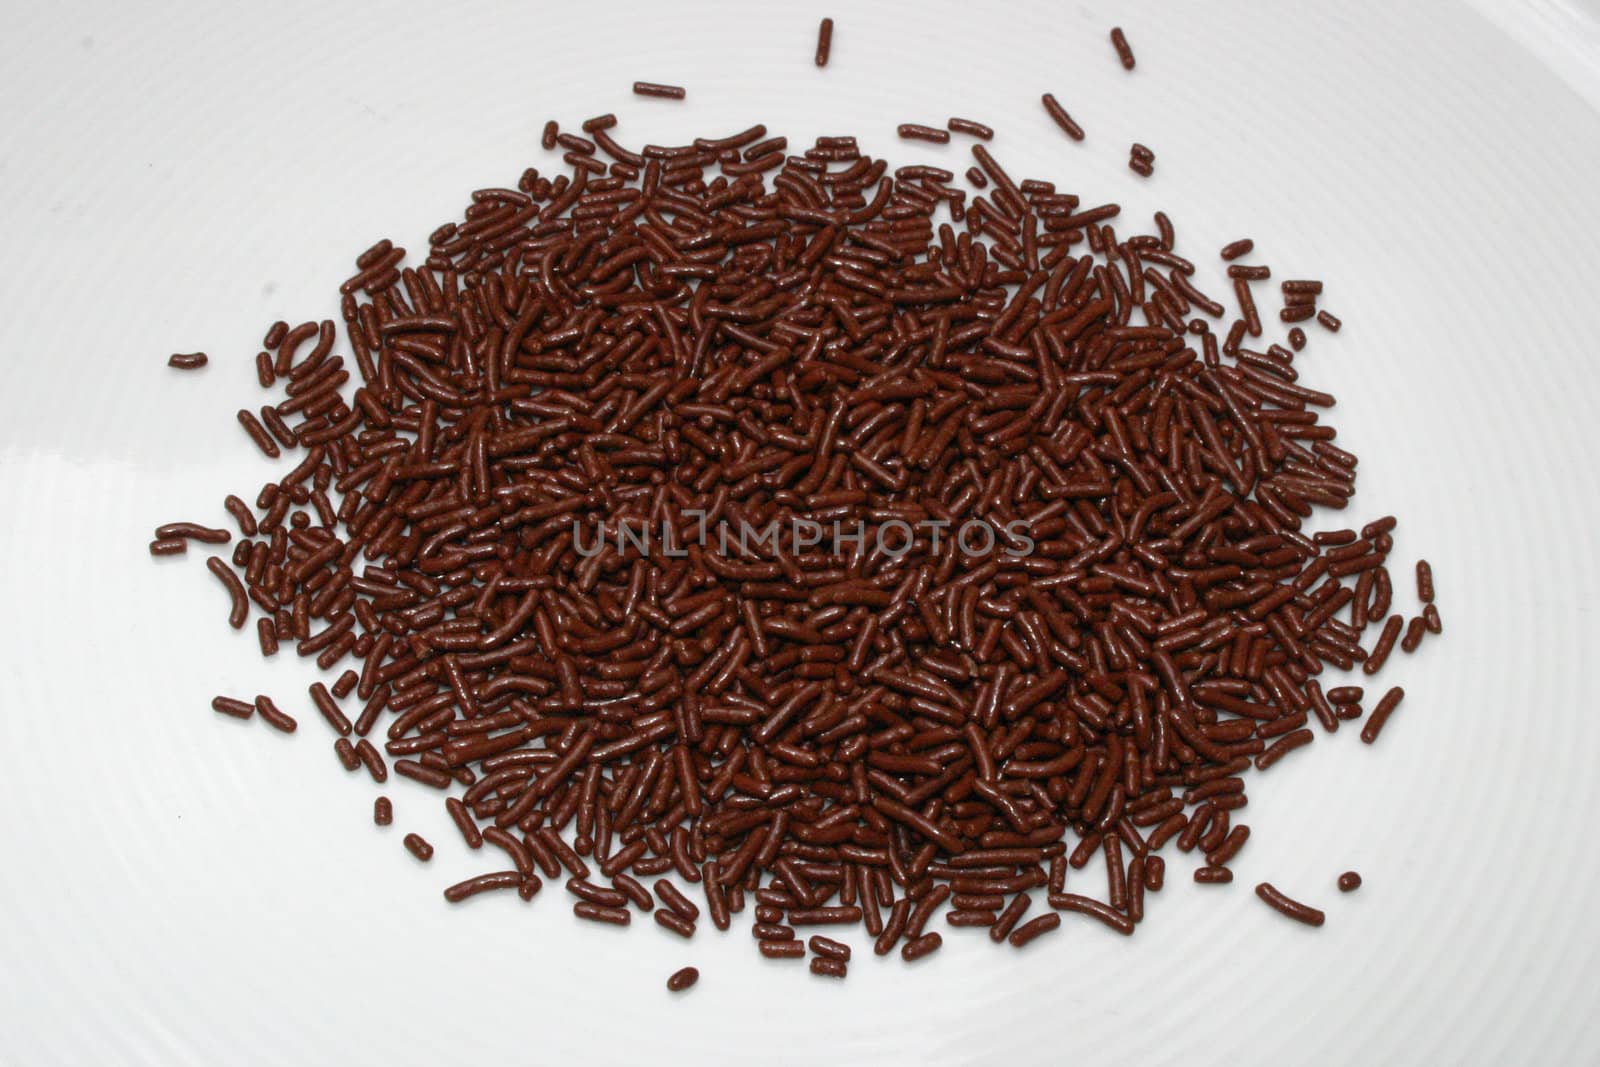 Pile of chocolate crumbles on white background for baking